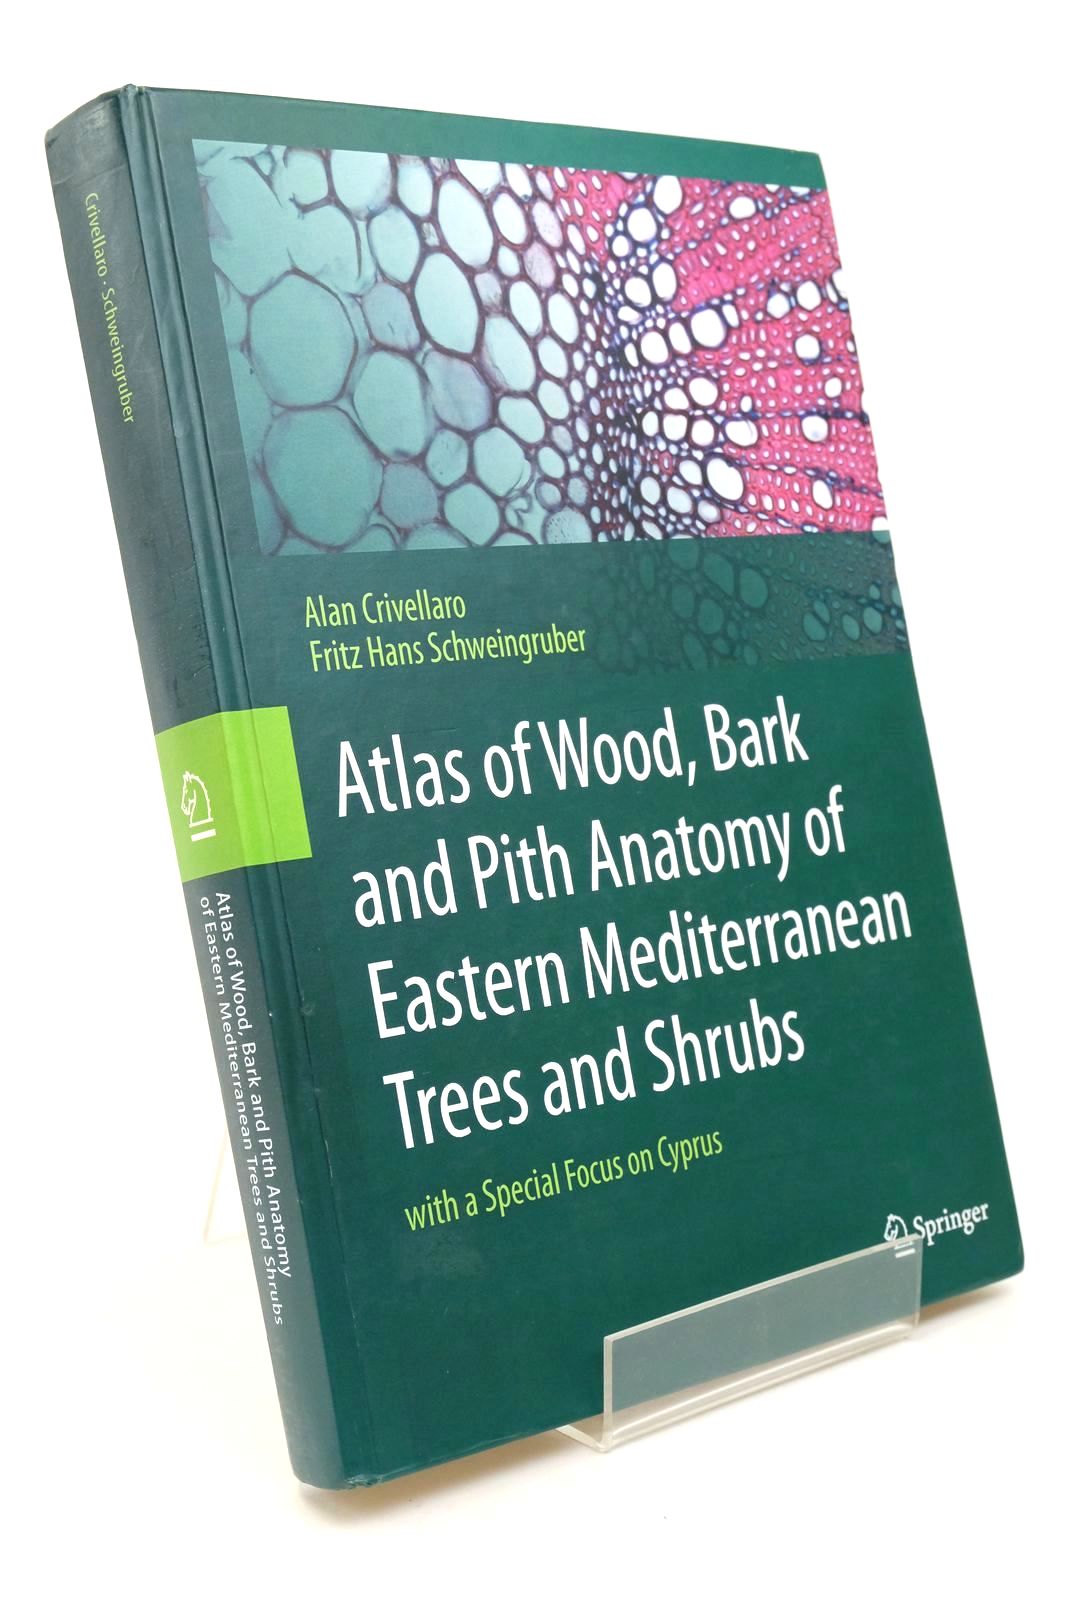 Photo of ATLAS OF WOOD, BARK AND PITH ANATOMY OF EASTERN MEDITERRANEAN TREES AND SHRUBS written by Crivellaro, Alan Schweingruber, Fritz Hans et al, published by Springer (STOCK CODE: 1323040)  for sale by Stella & Rose's Books